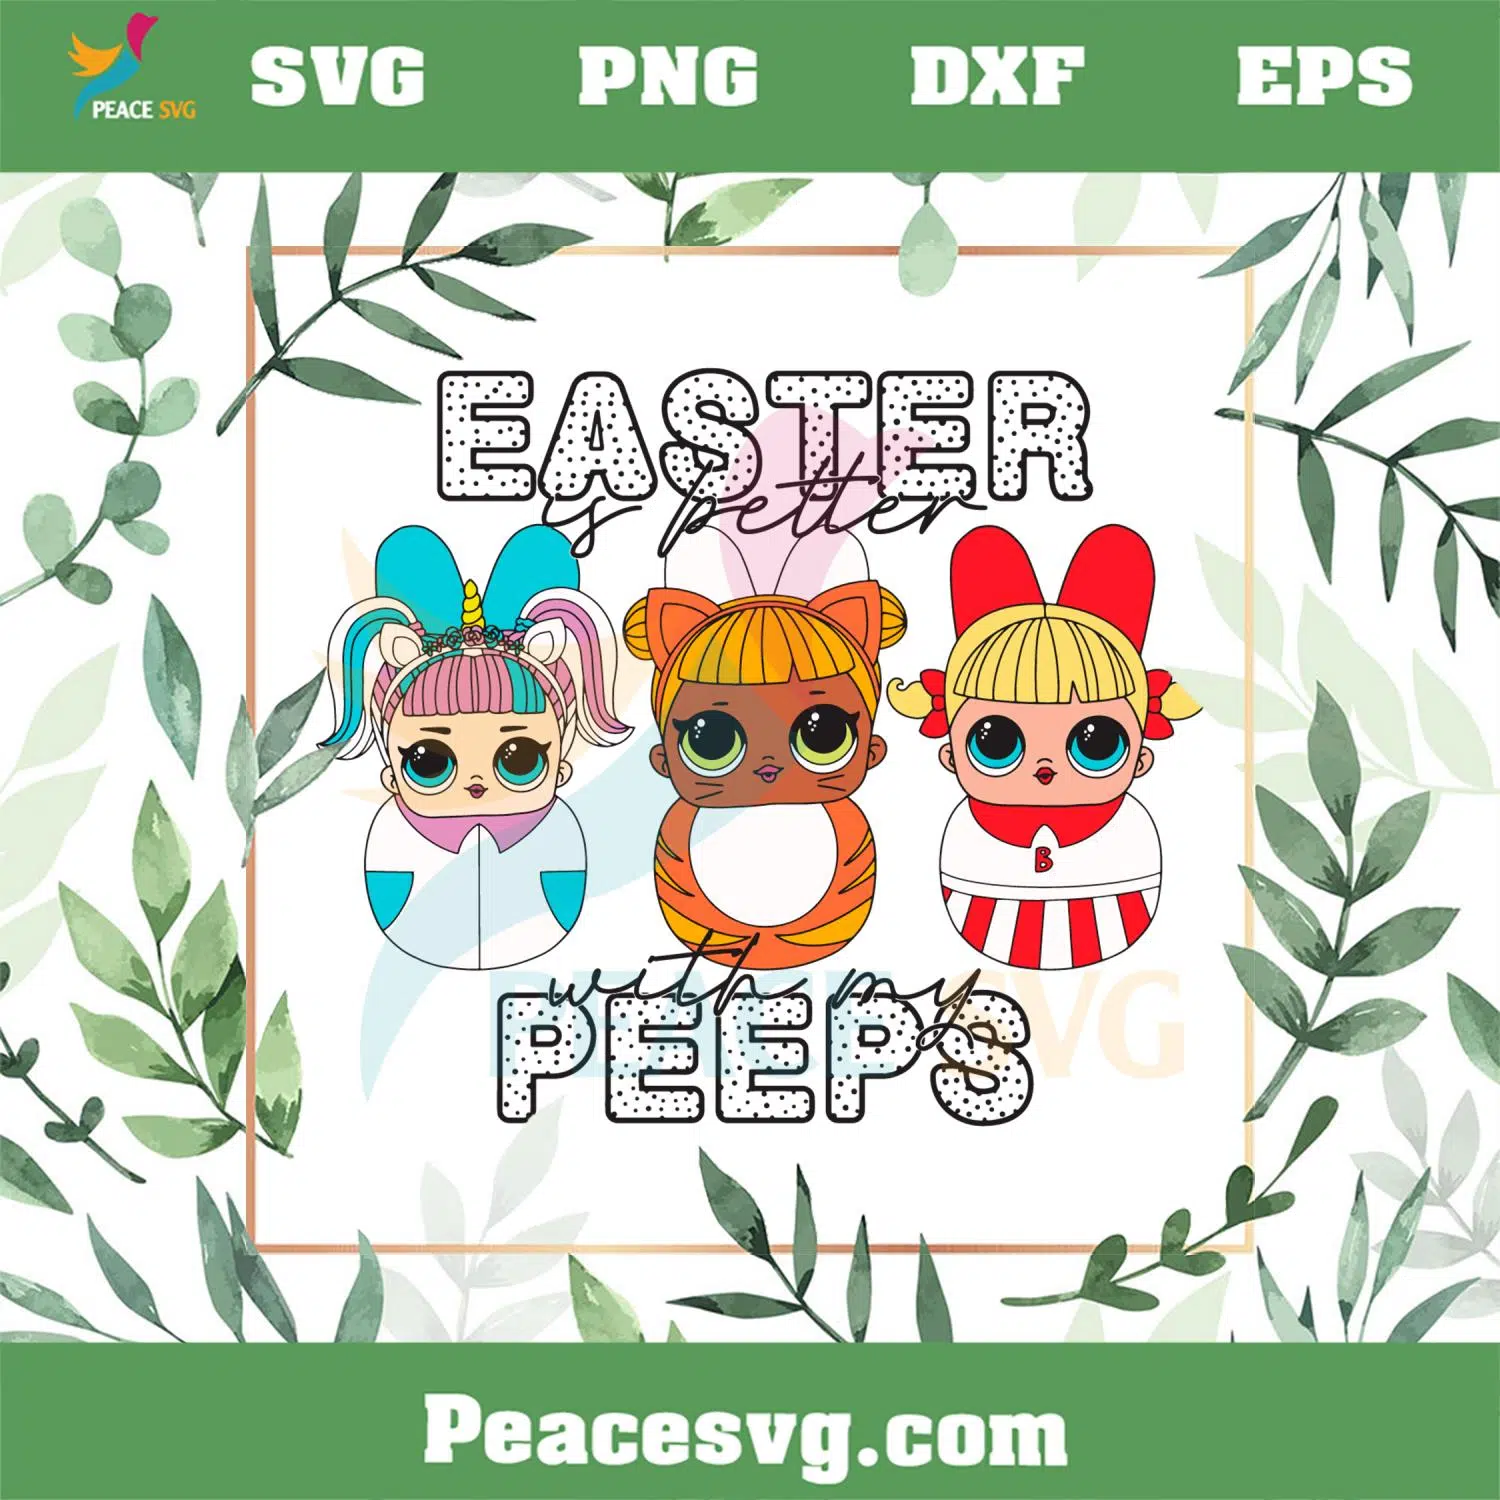 Easter Is Better With My Peeps SVG Cute Little Girl Easter Peeps SVG